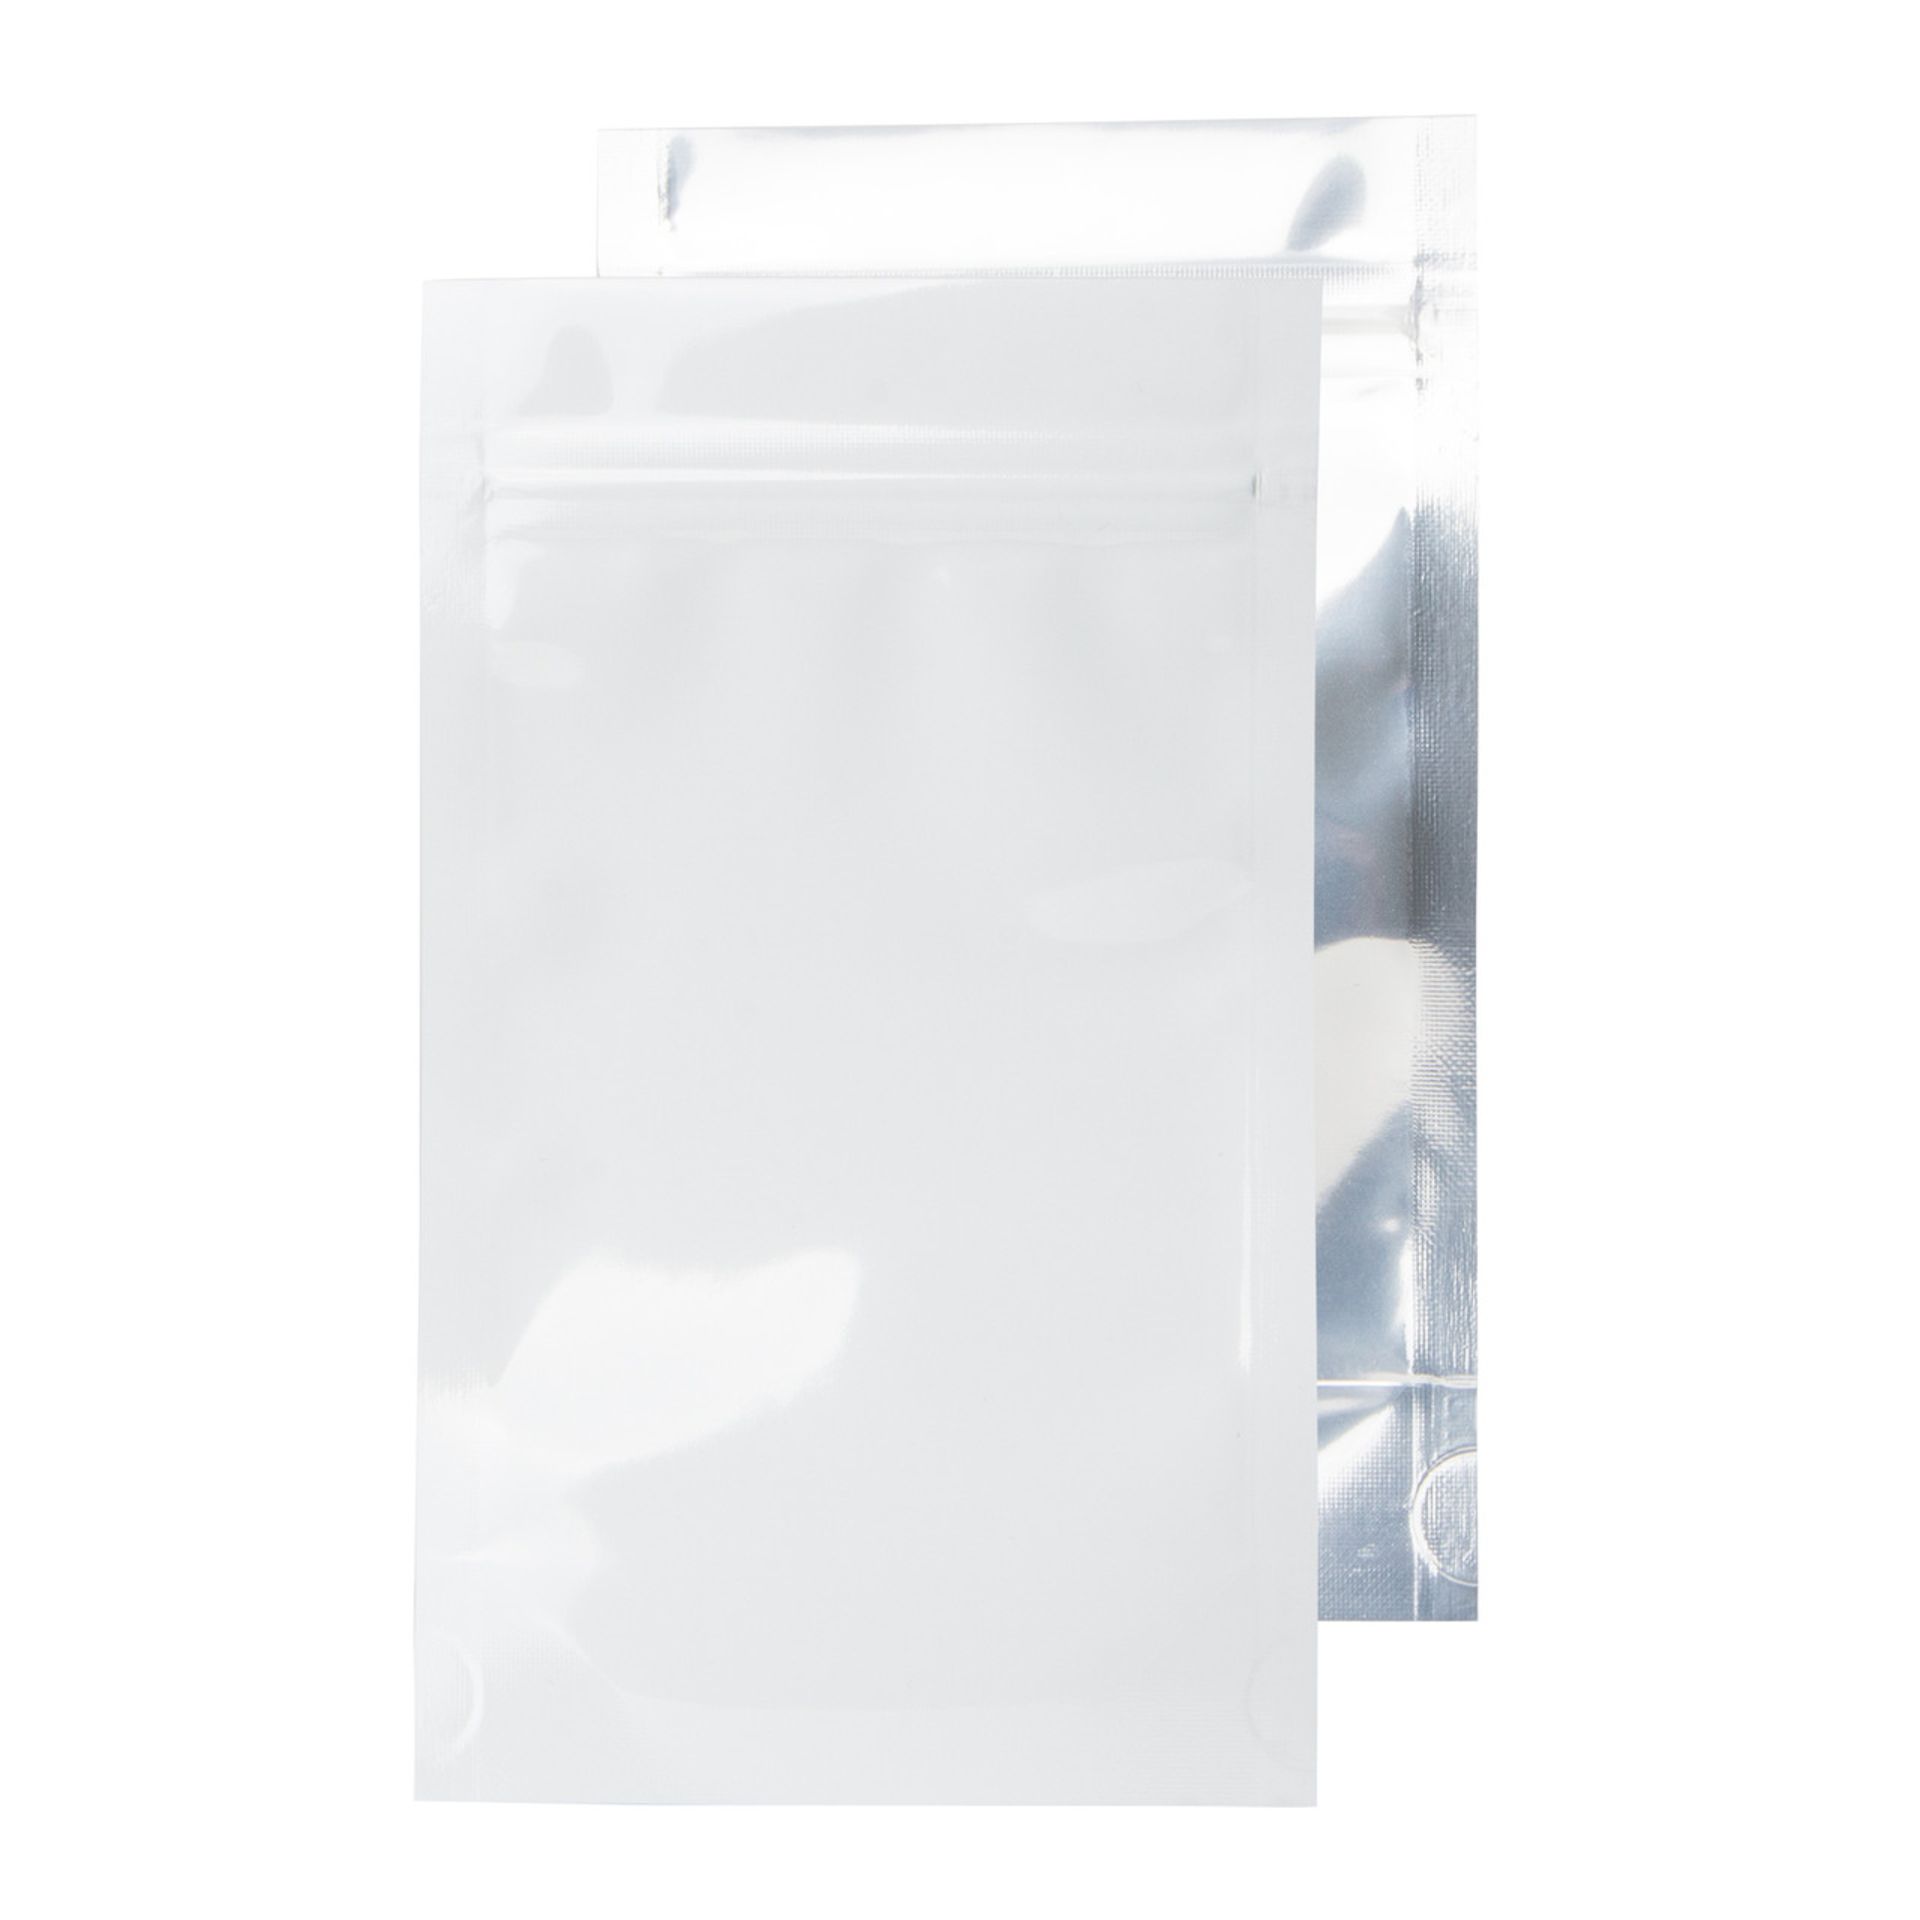 (Located in Moreno Valley, CA) 7g Barrier Bags White/Clear, No Tear Notch, Qty 23,450